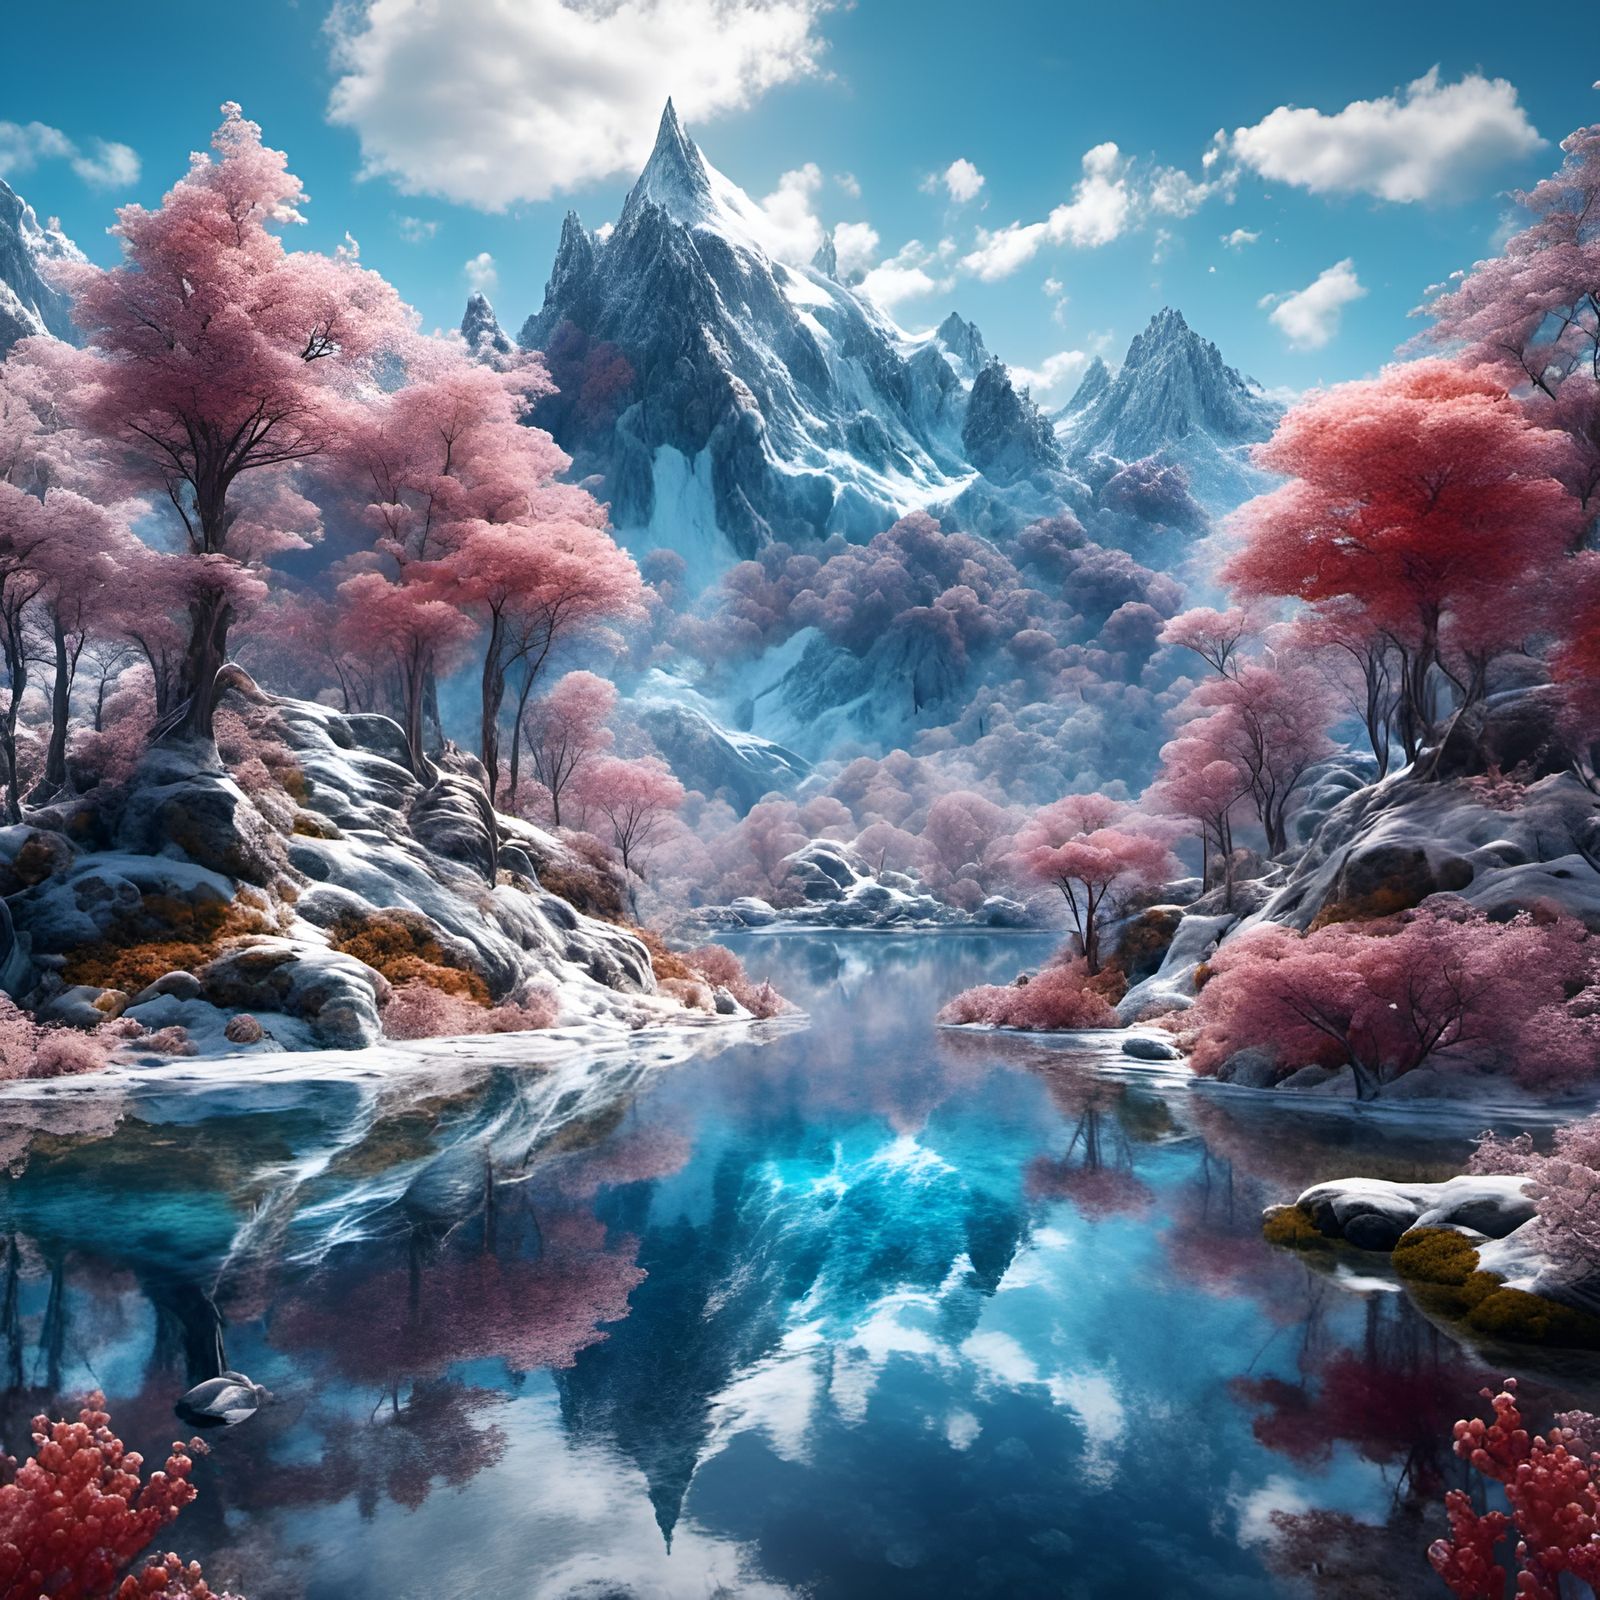 Pink trees?